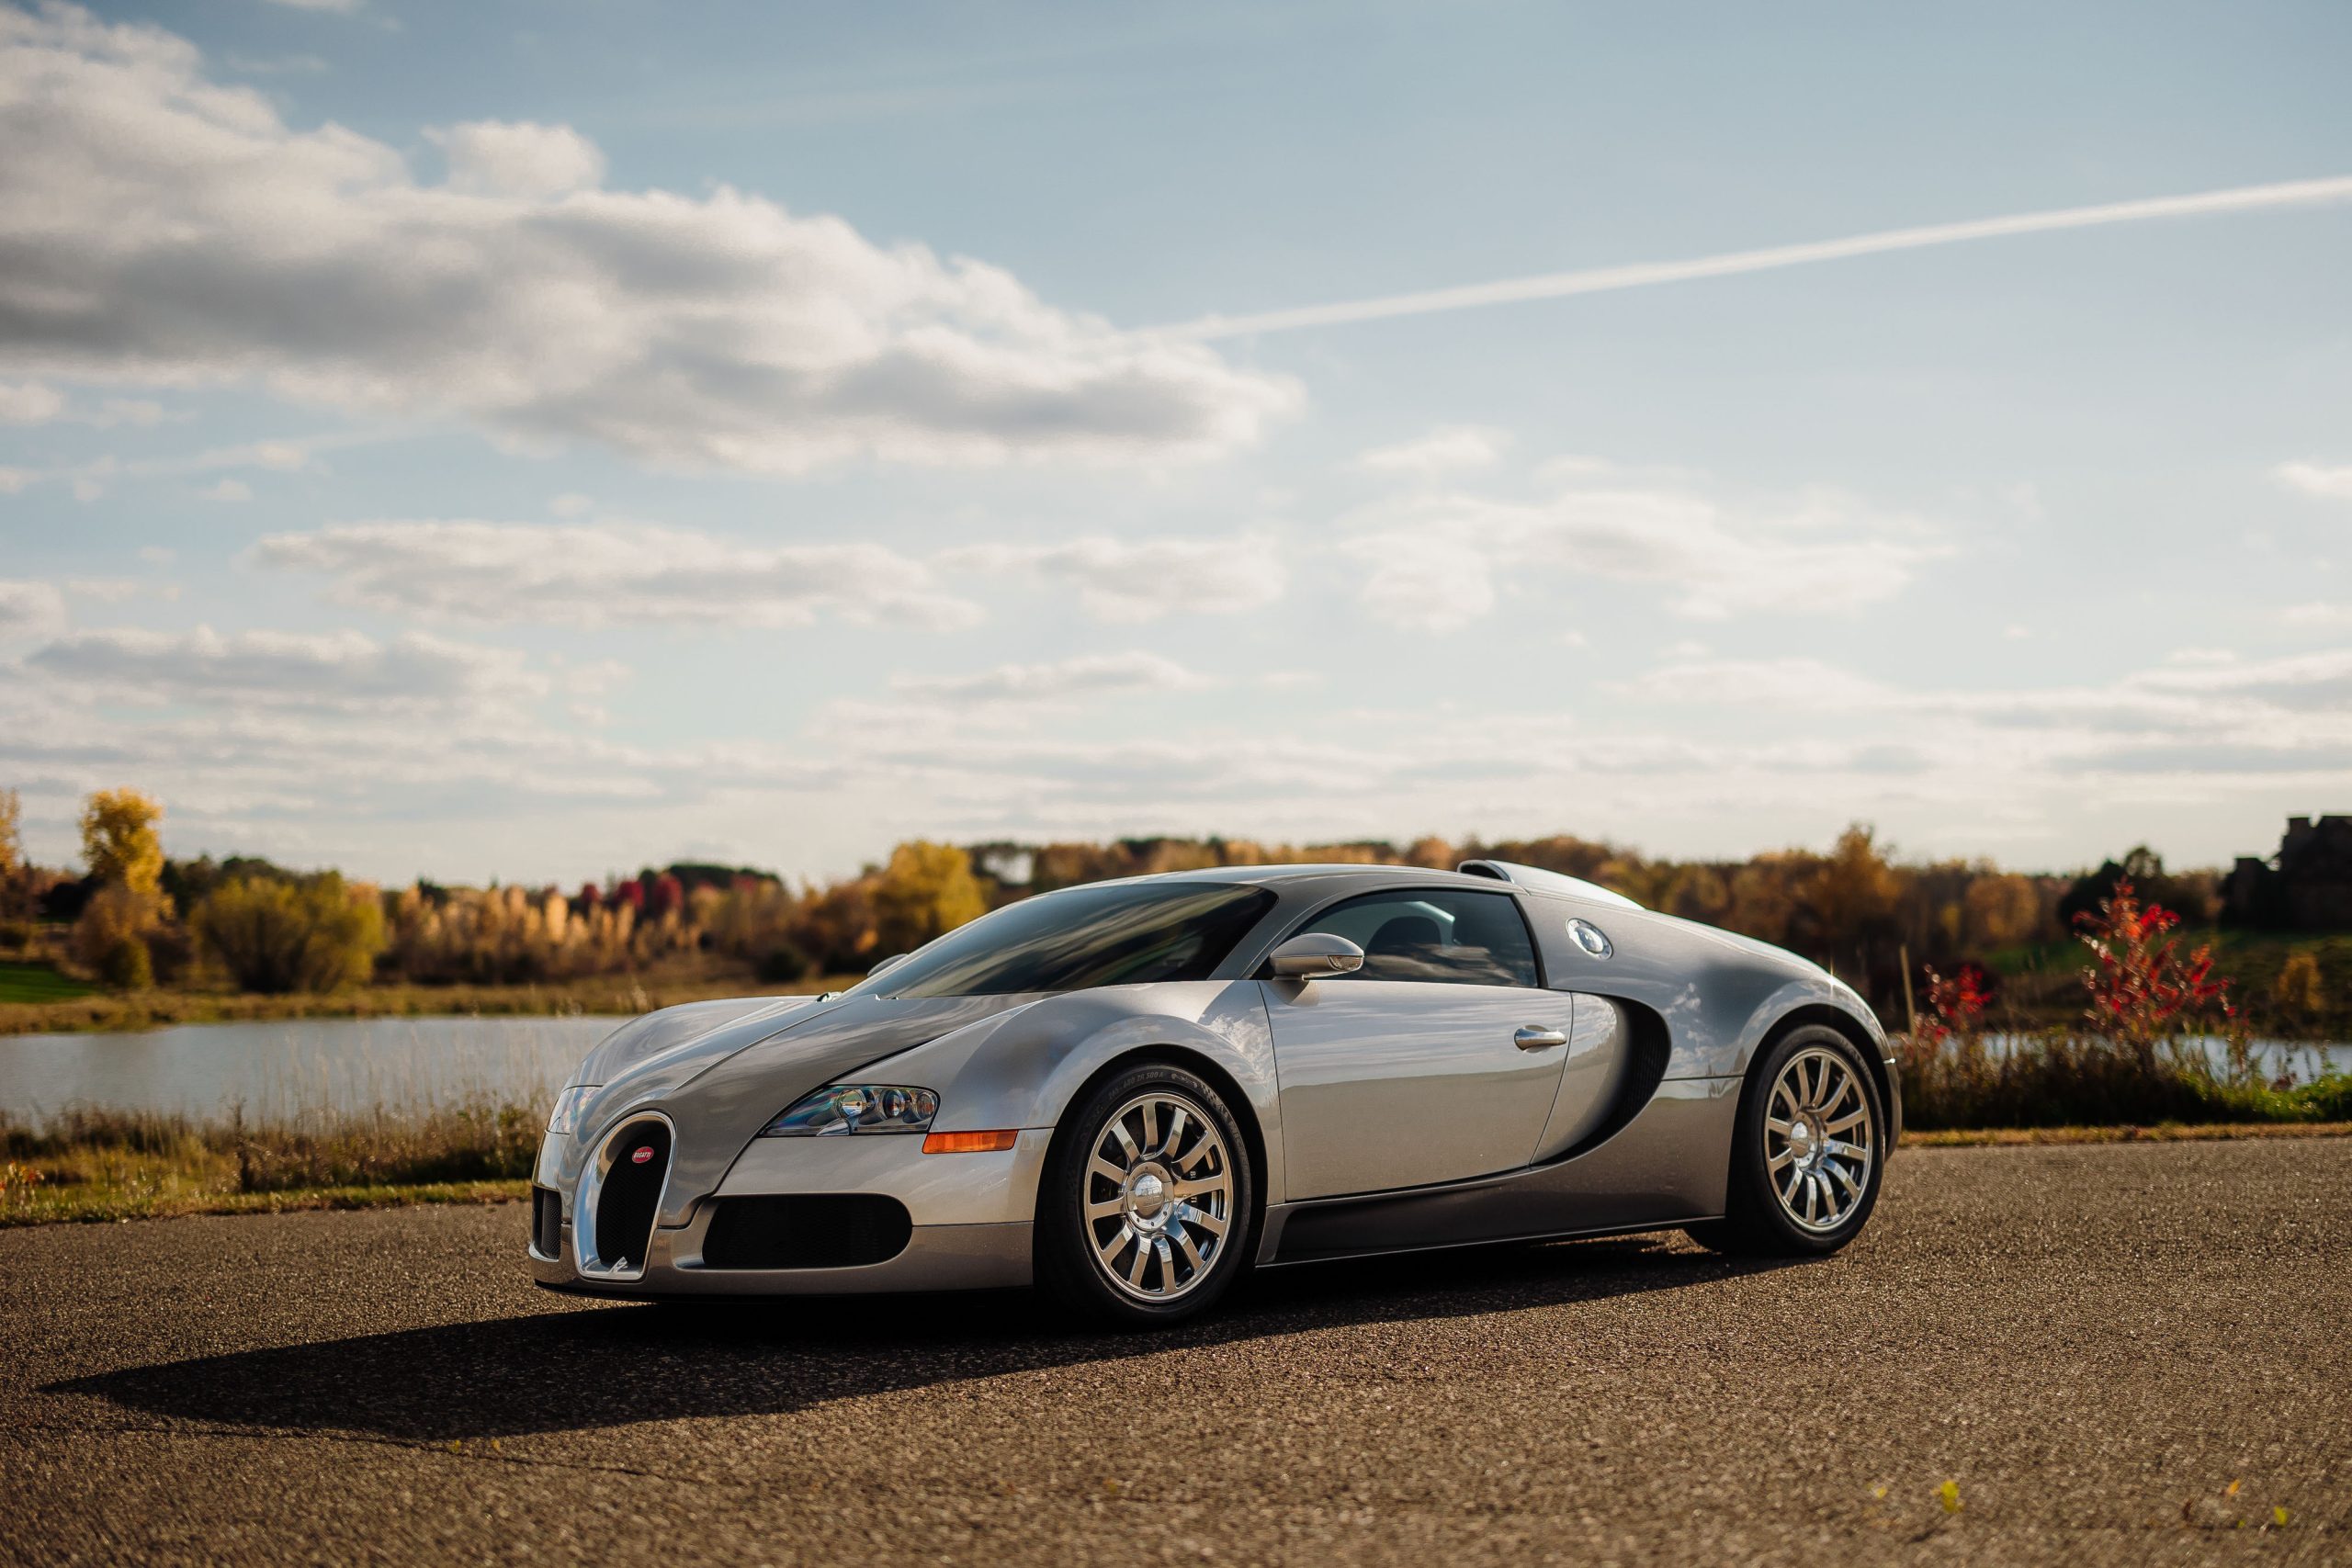 2008 Bugatti Veyron 16.4 | Kris Clewell ©2023 Courtesy of RM Sotheby’s